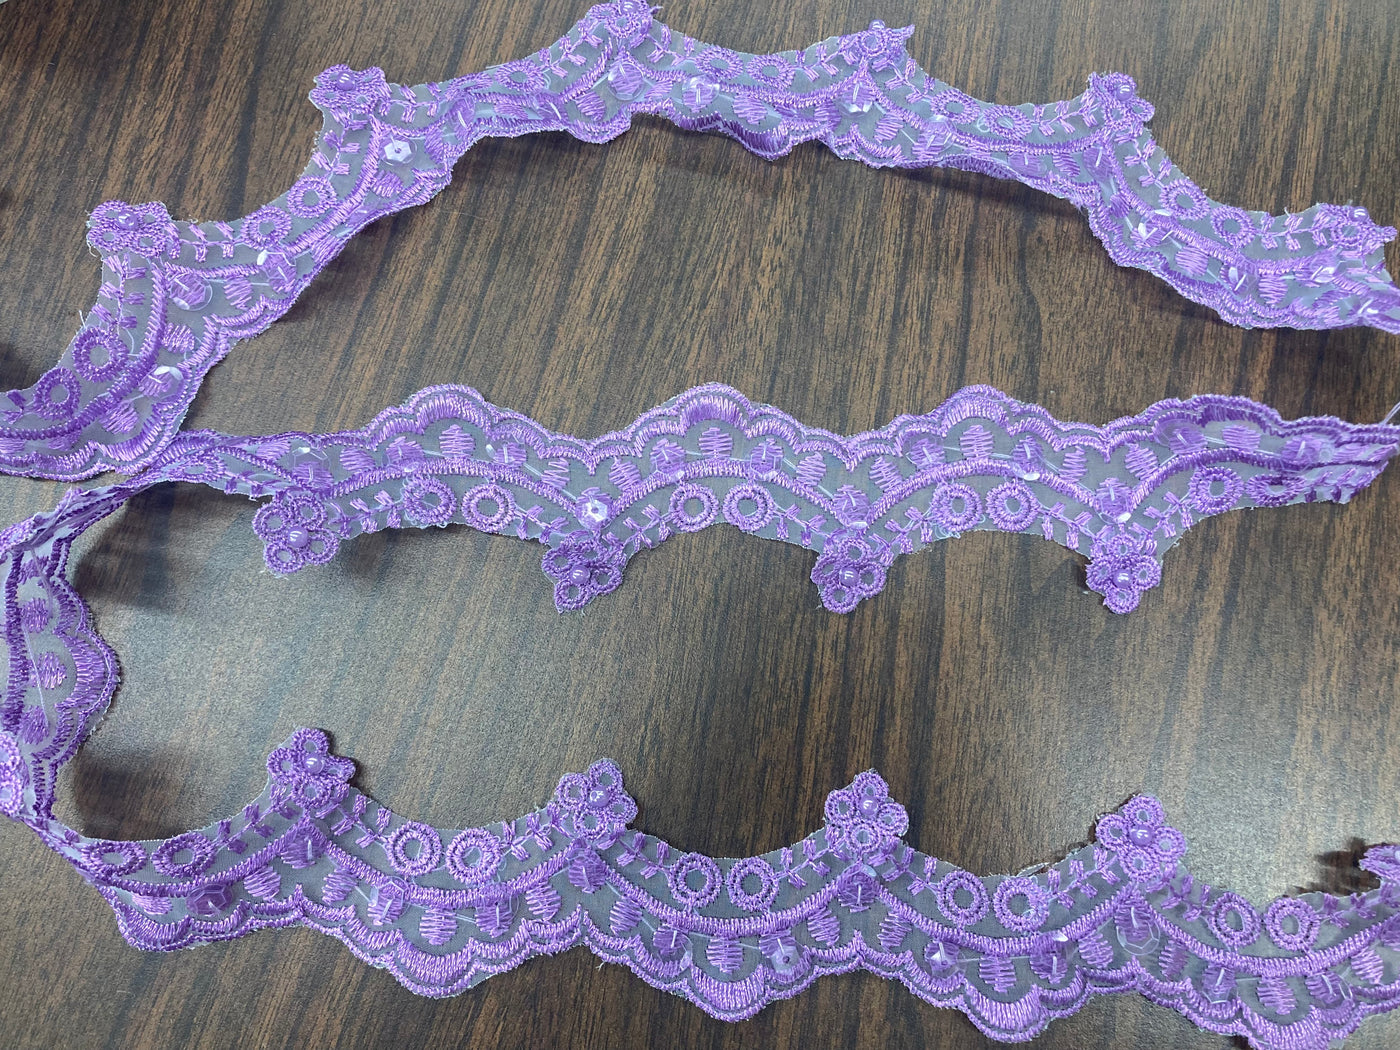 Beaded Lilac Lace Trim Embroidered on 100% Polyester Organza . Large Arch Scalloped Trim. Formal Trim. Perfect for Edging and Gowns. Sold by the Yard. Lace Usa